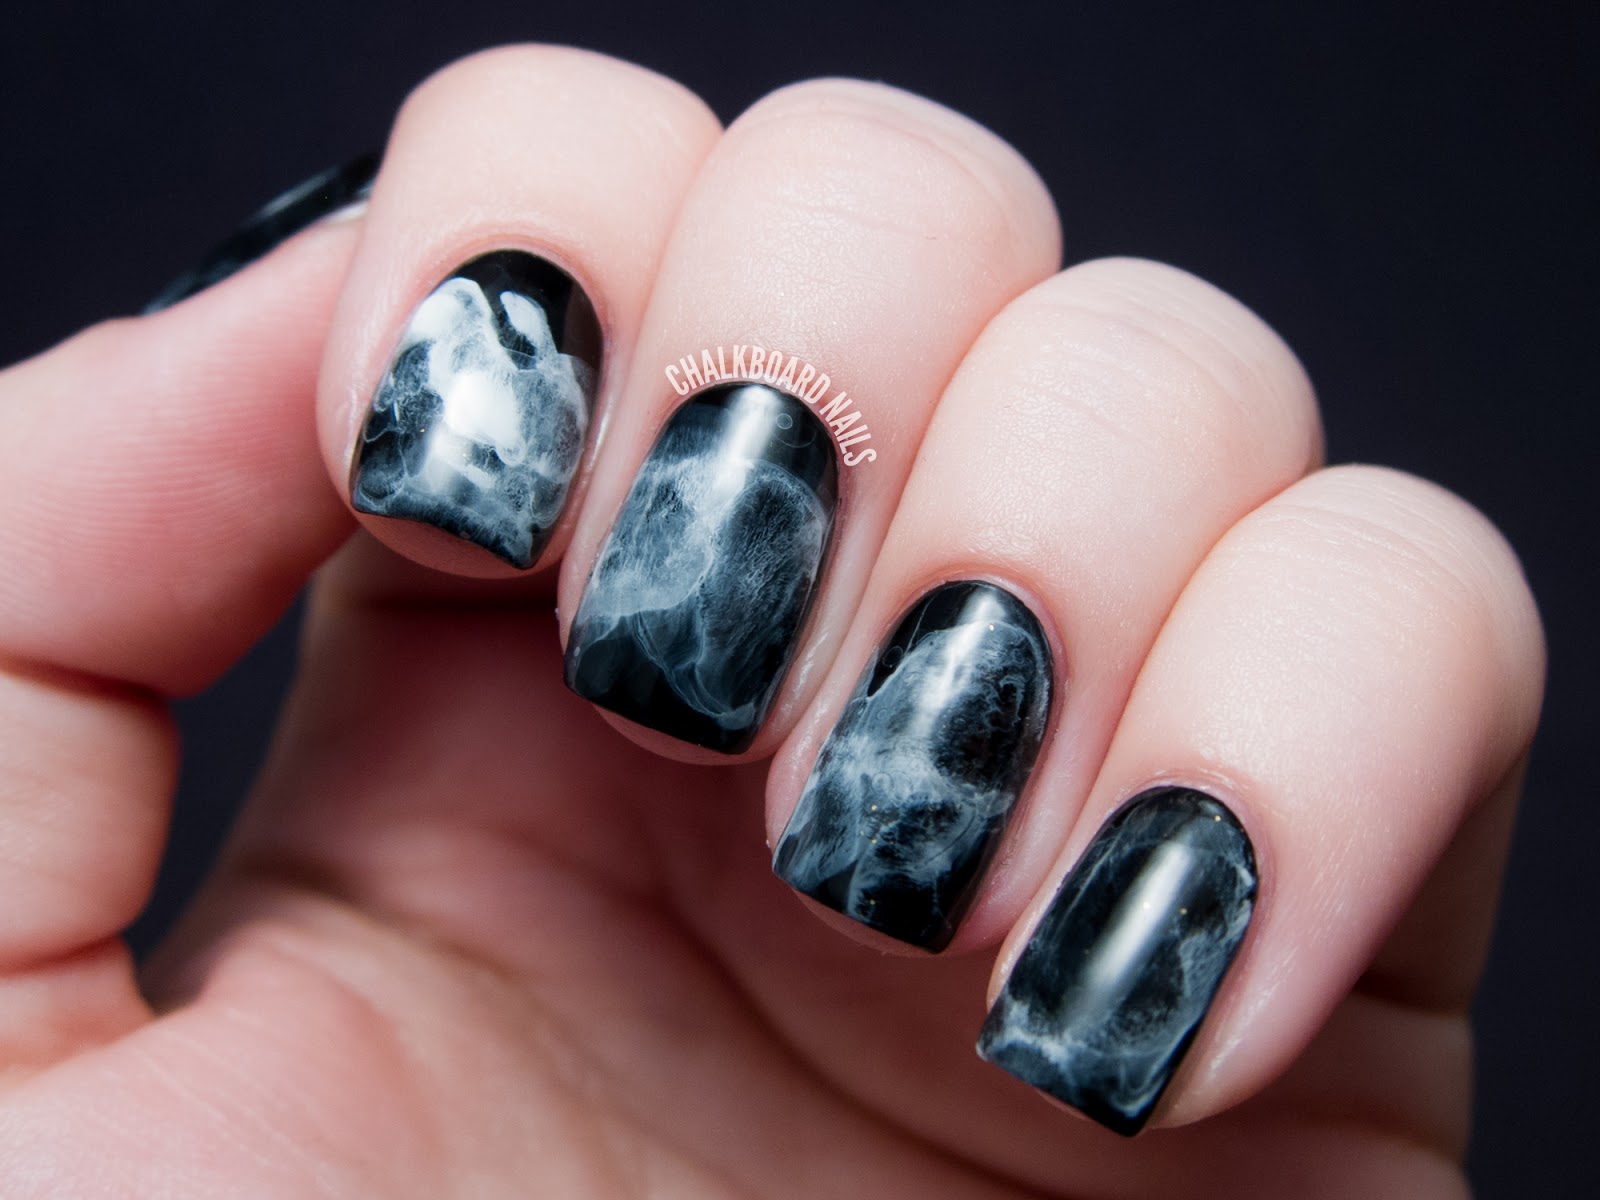 2. Simple Black and White Nail Designs for Beginners - wide 6